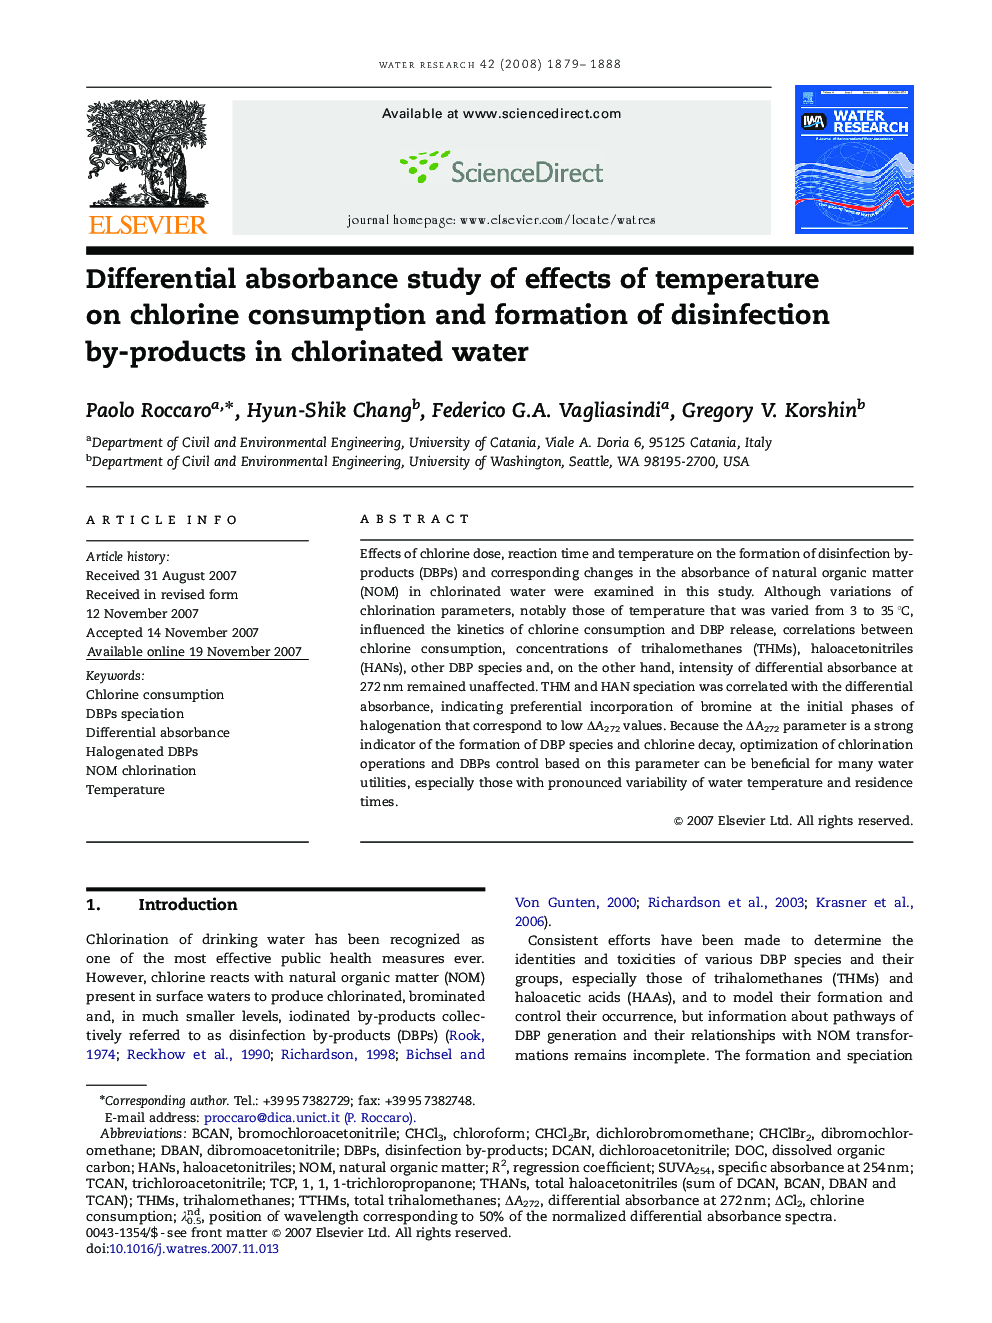 Differential absorbance study of effects of temperature on chlorine consumption and formation of disinfection by-products in chlorinated water